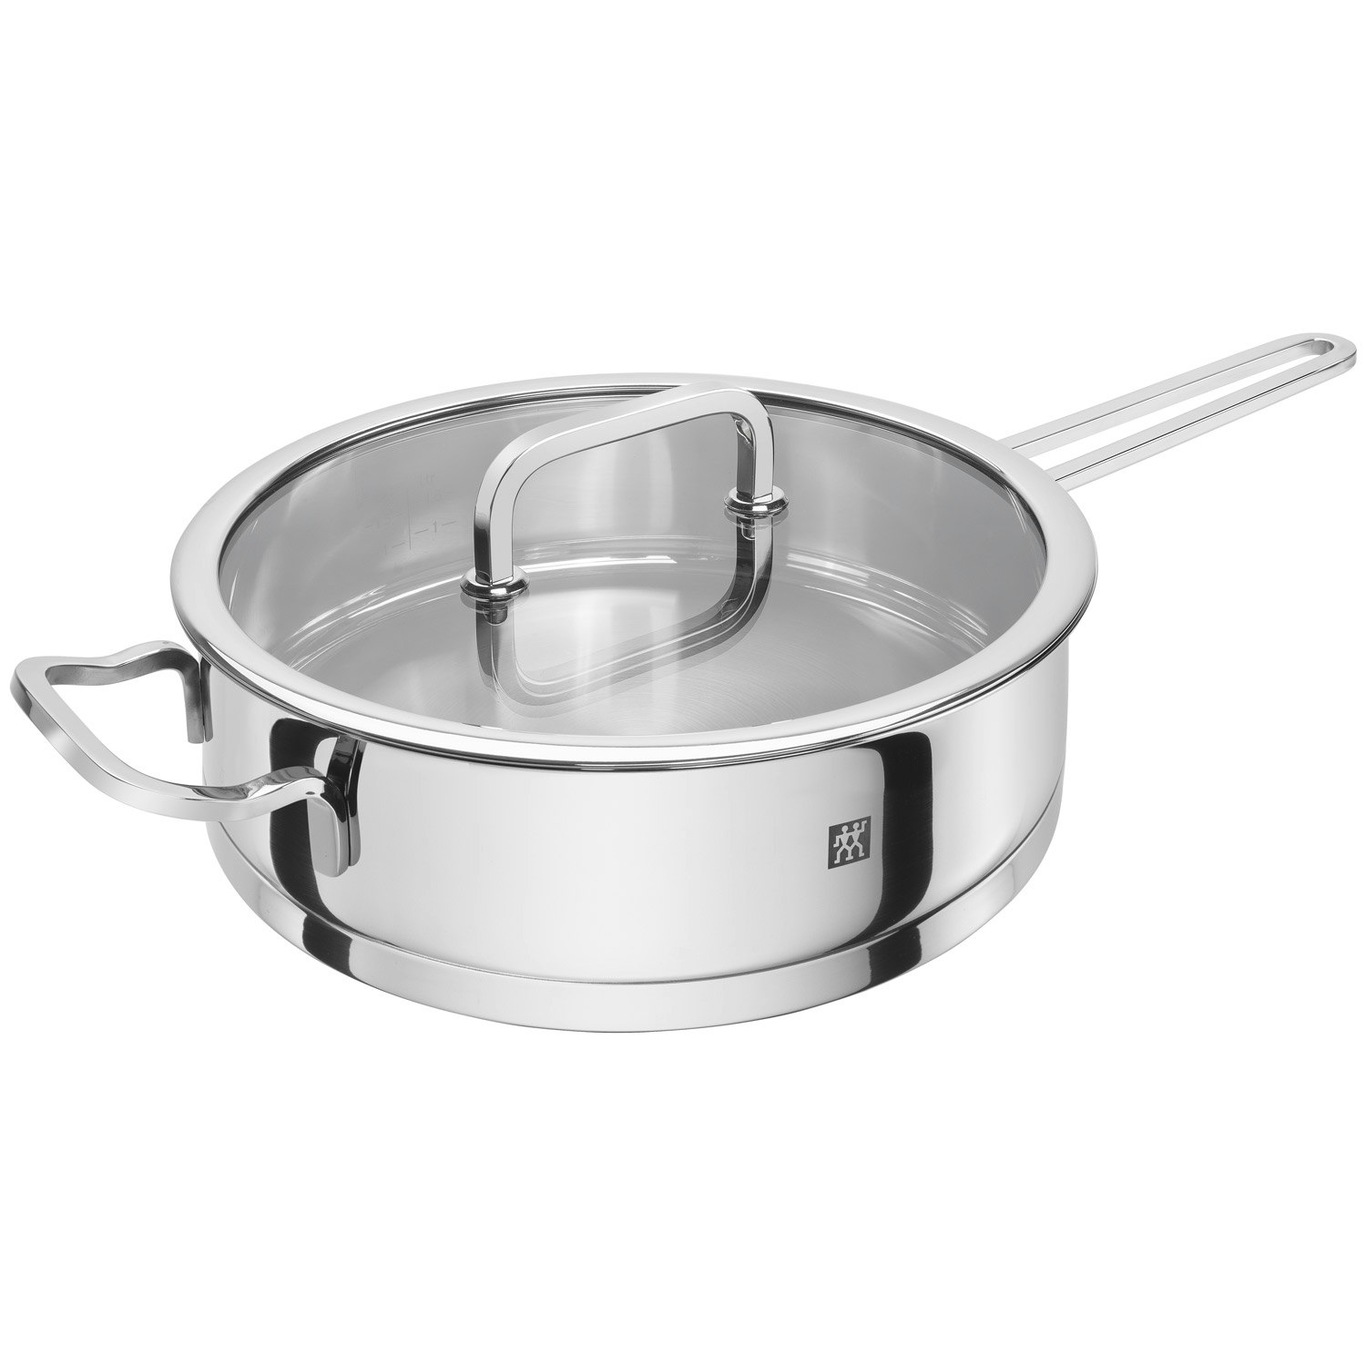 https://royaldesign.com/image/2/zwilling-moment-s-saute-pan-with-glass-lid-24x10-cm-0?w=800&quality=80